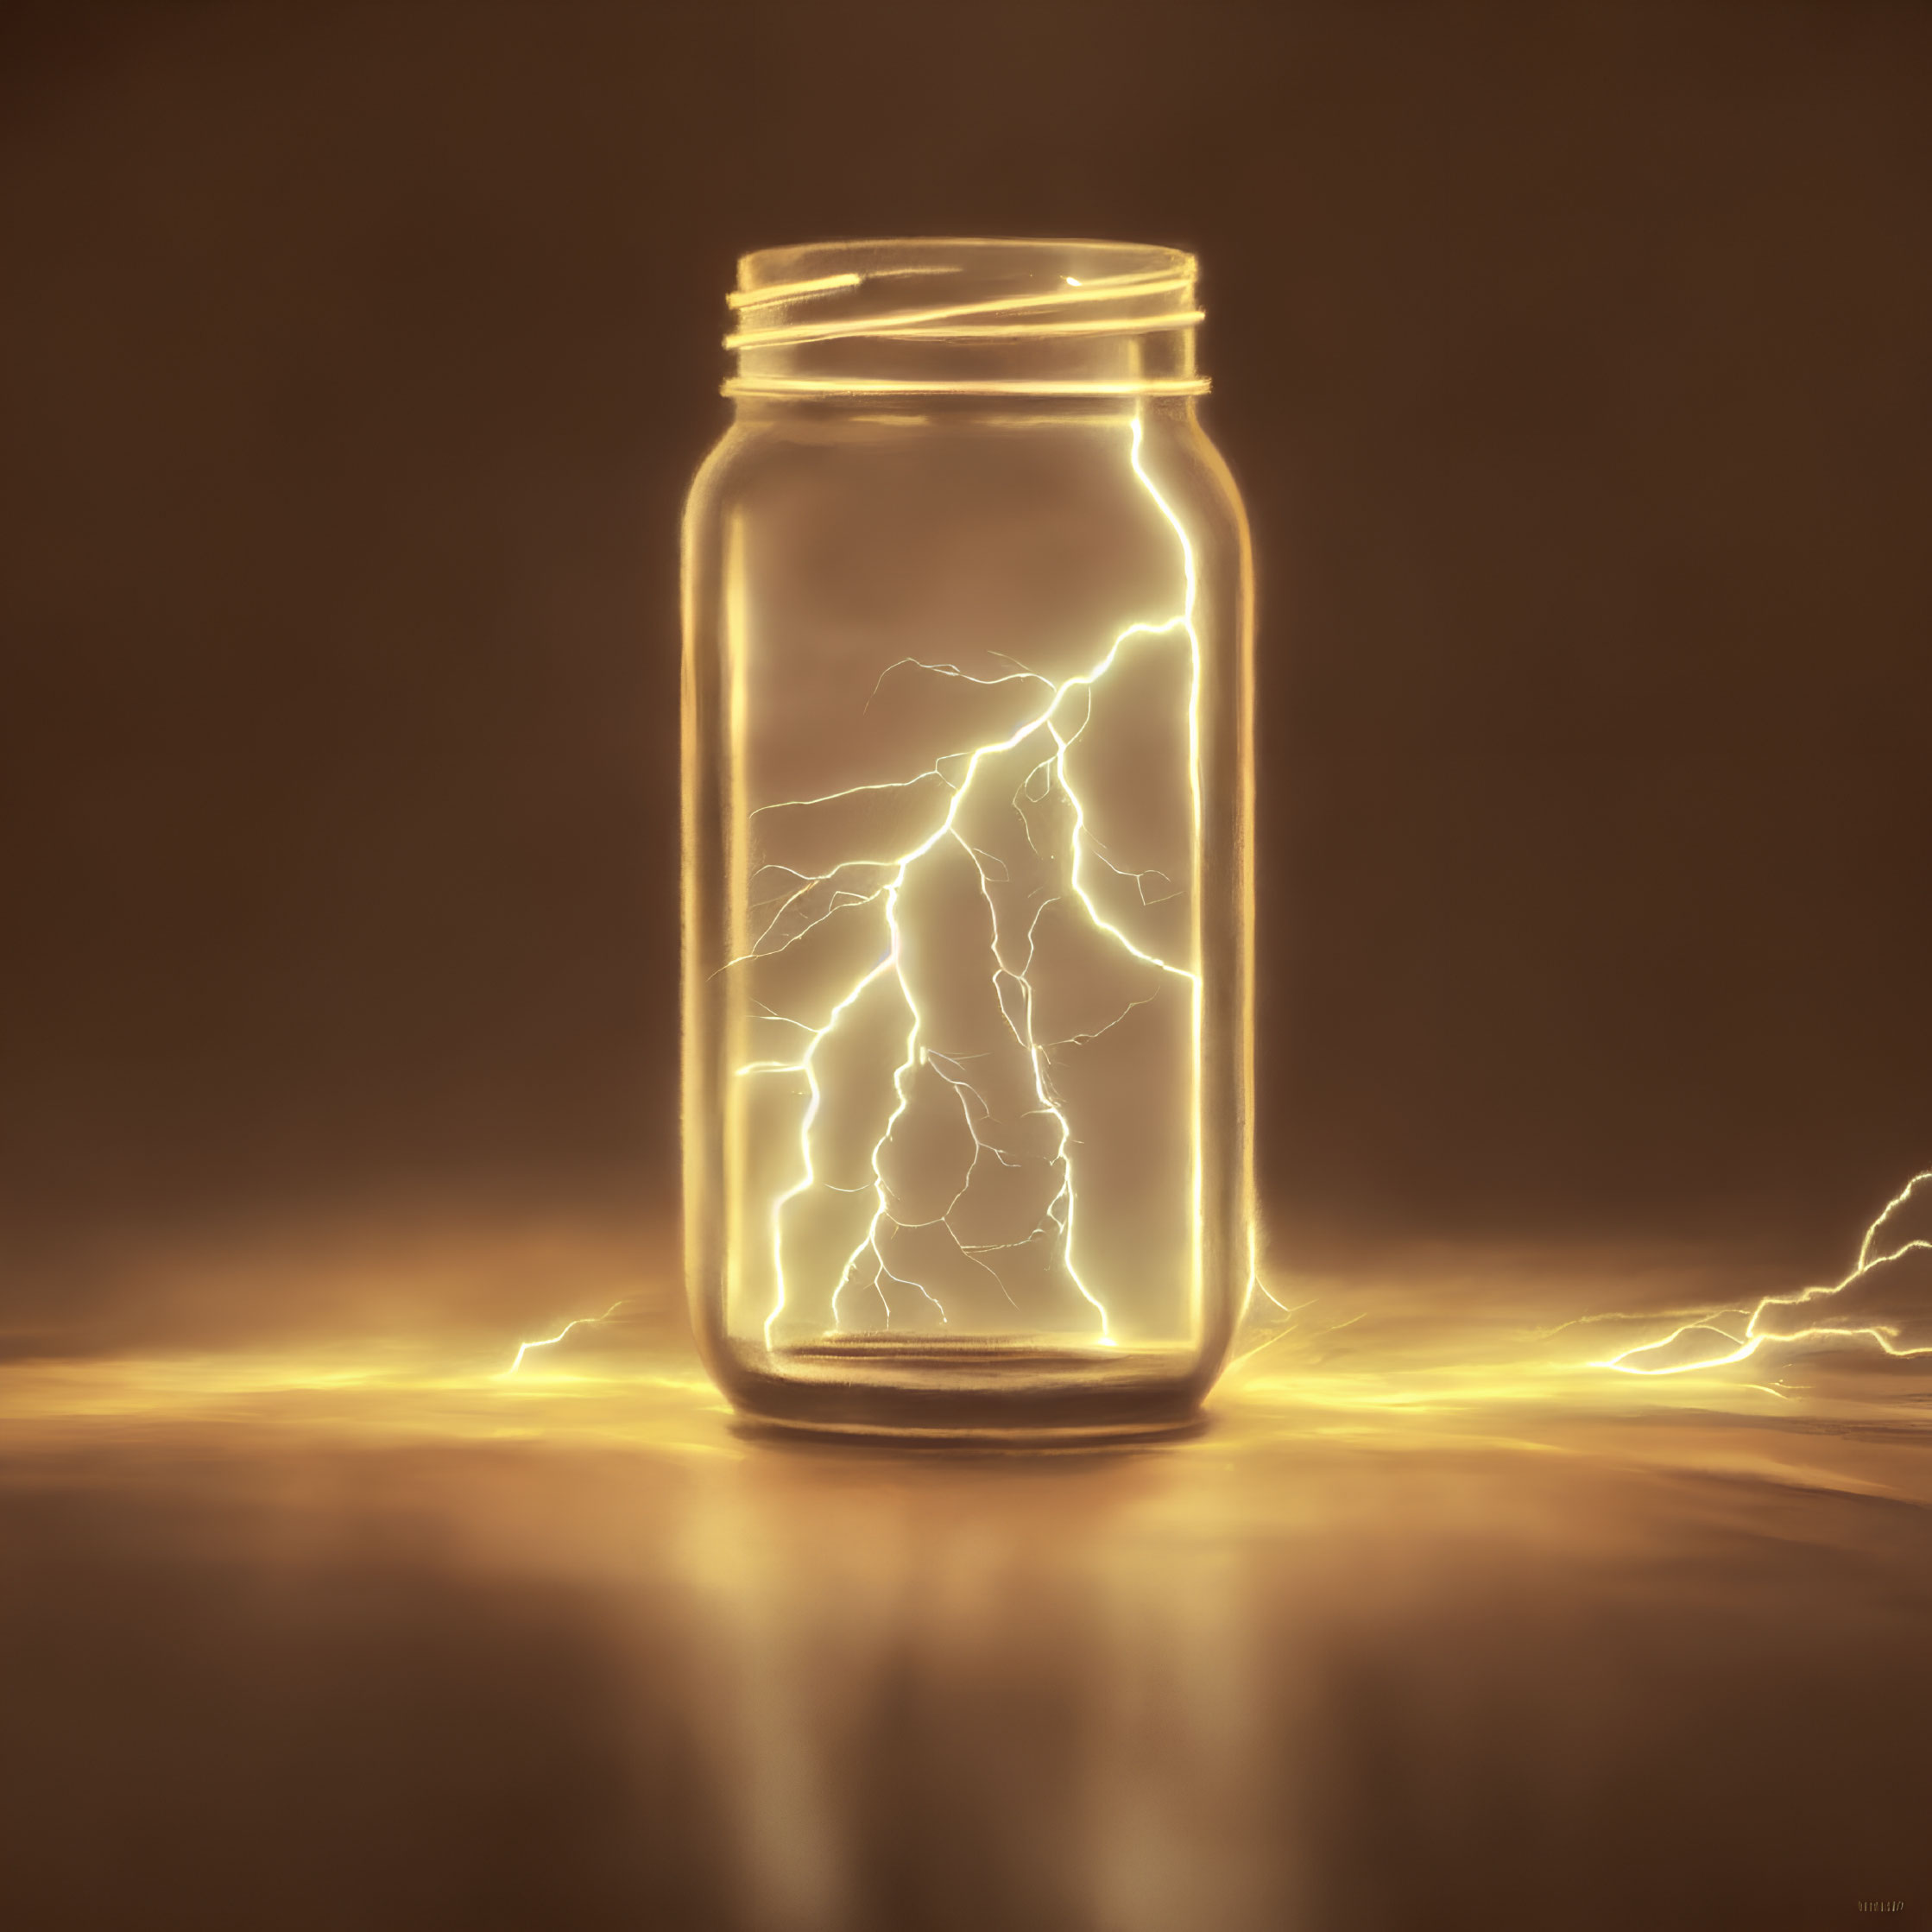 Luminescent glass jar with branching lightning on warm amber background